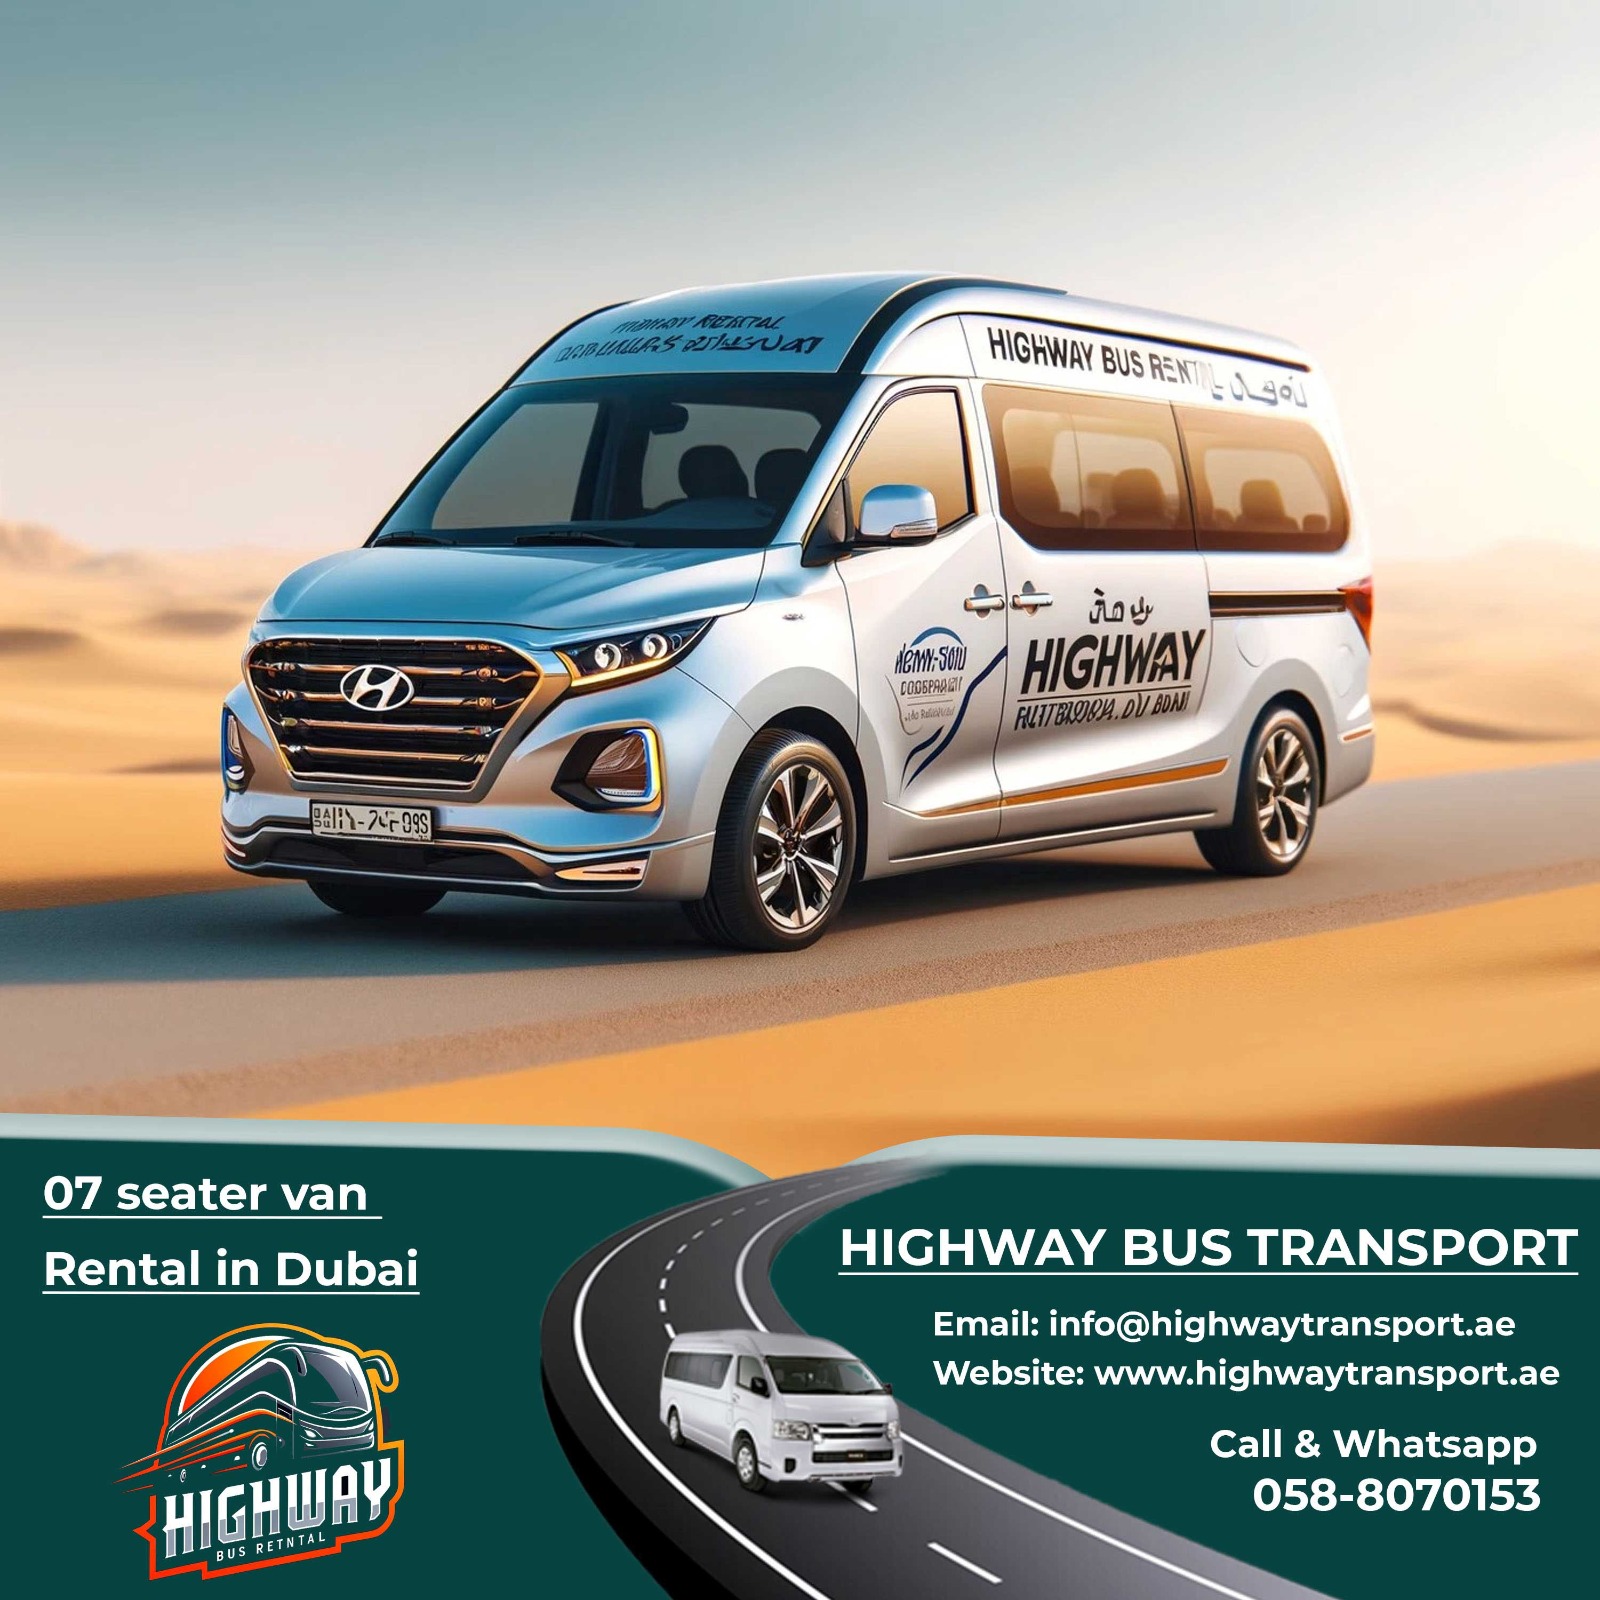 Image of a spacious 7-seater van available for rental in Dubai